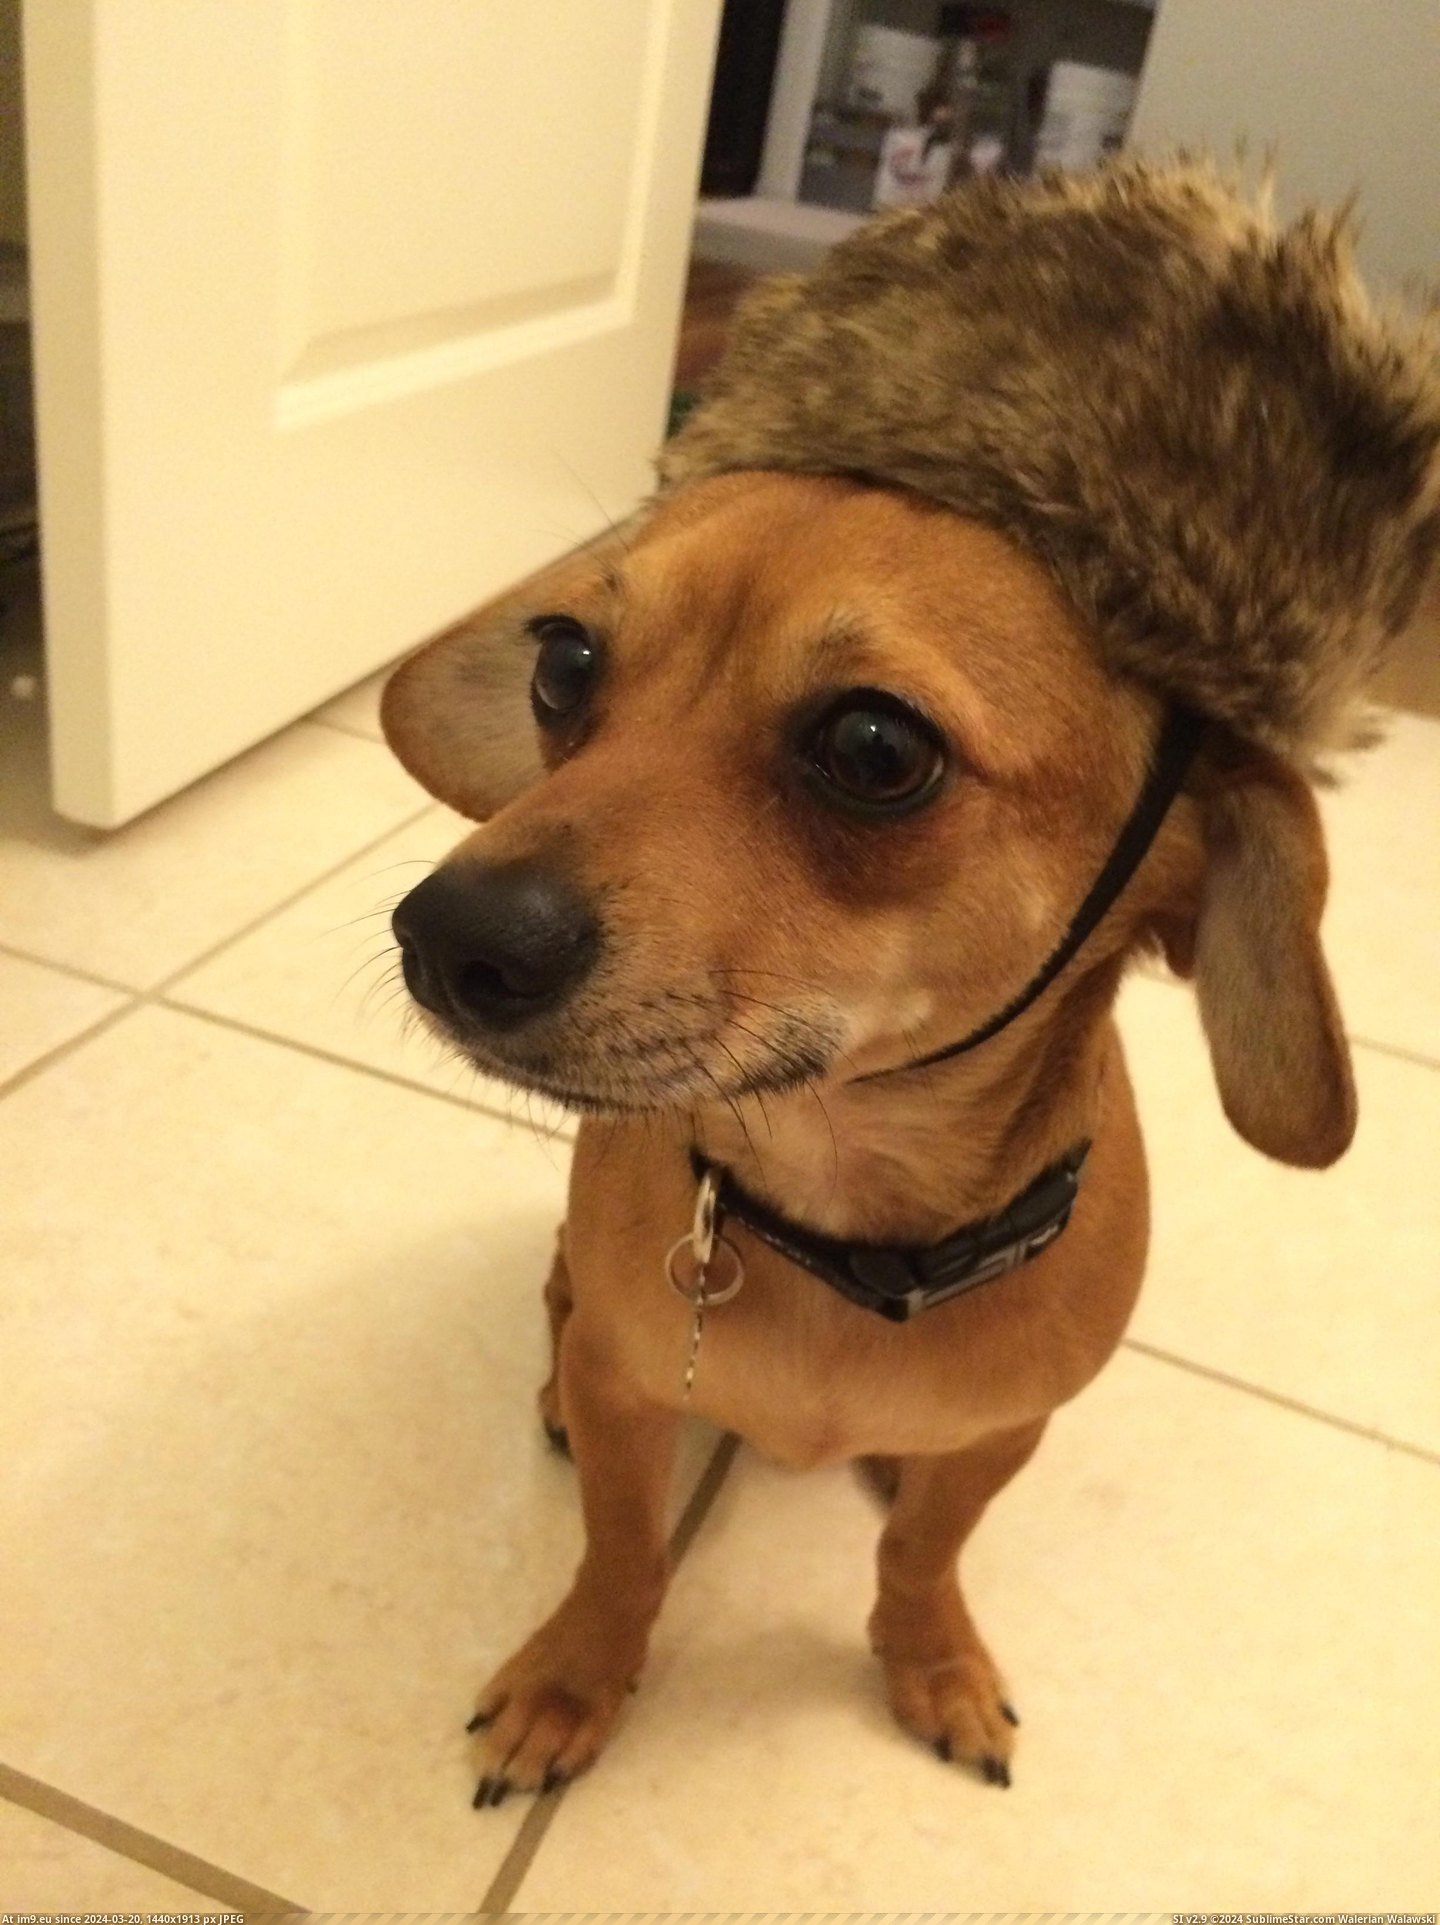 #Was #Tiny #Spent #Hats #Cents #Clearance #Store #Pet #Furry [Aww] The pet store had tiny furry hats on clearance. It was the best 25 cents I've ever spent. Pic. (Bild von album My r/AWW favs))